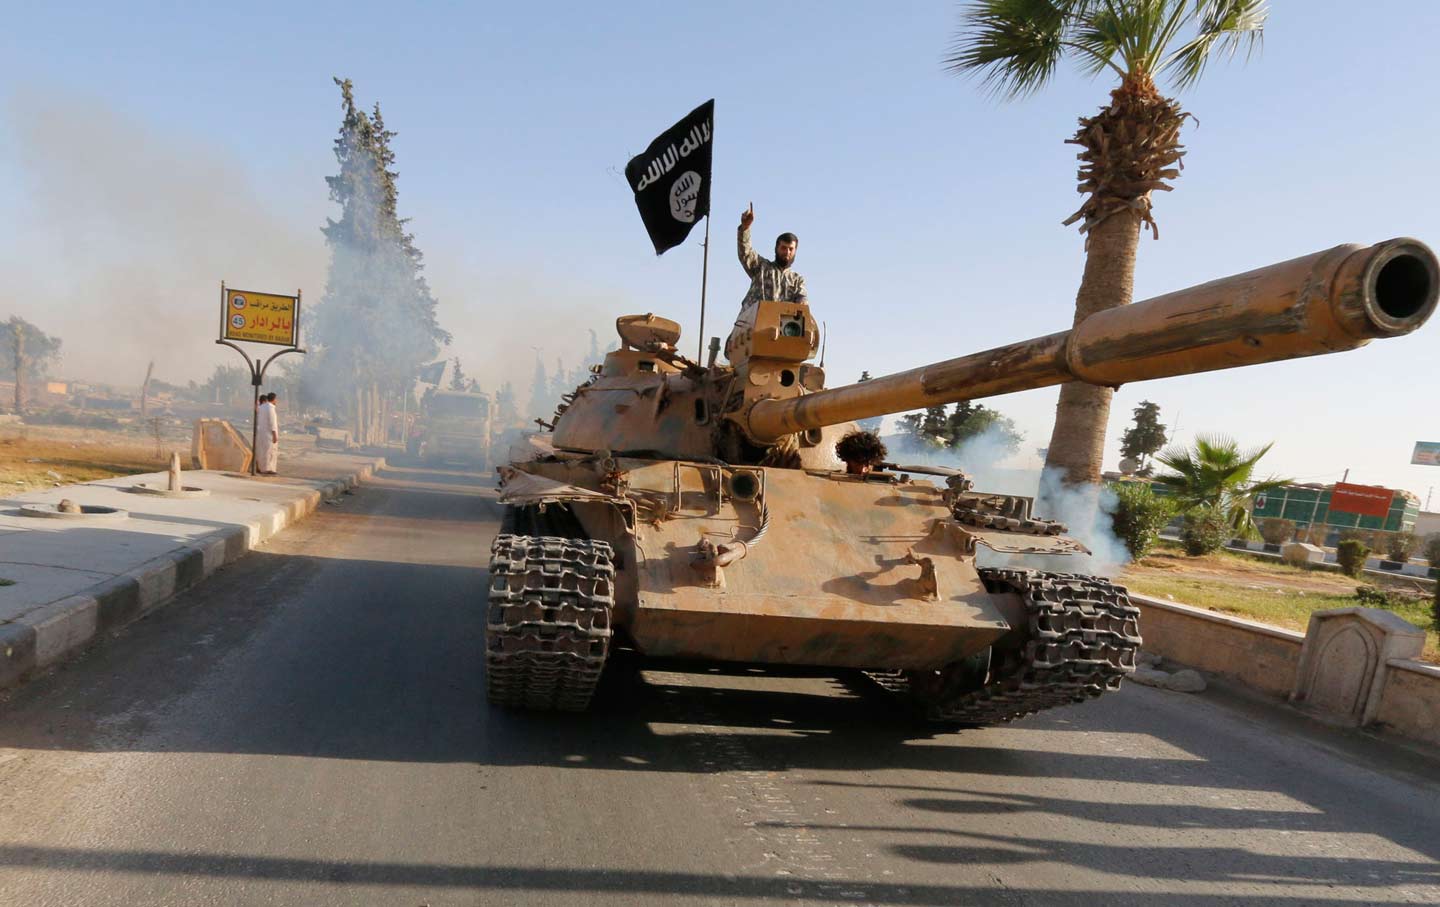 Why Do We Pretend ISIS Is Crazy?